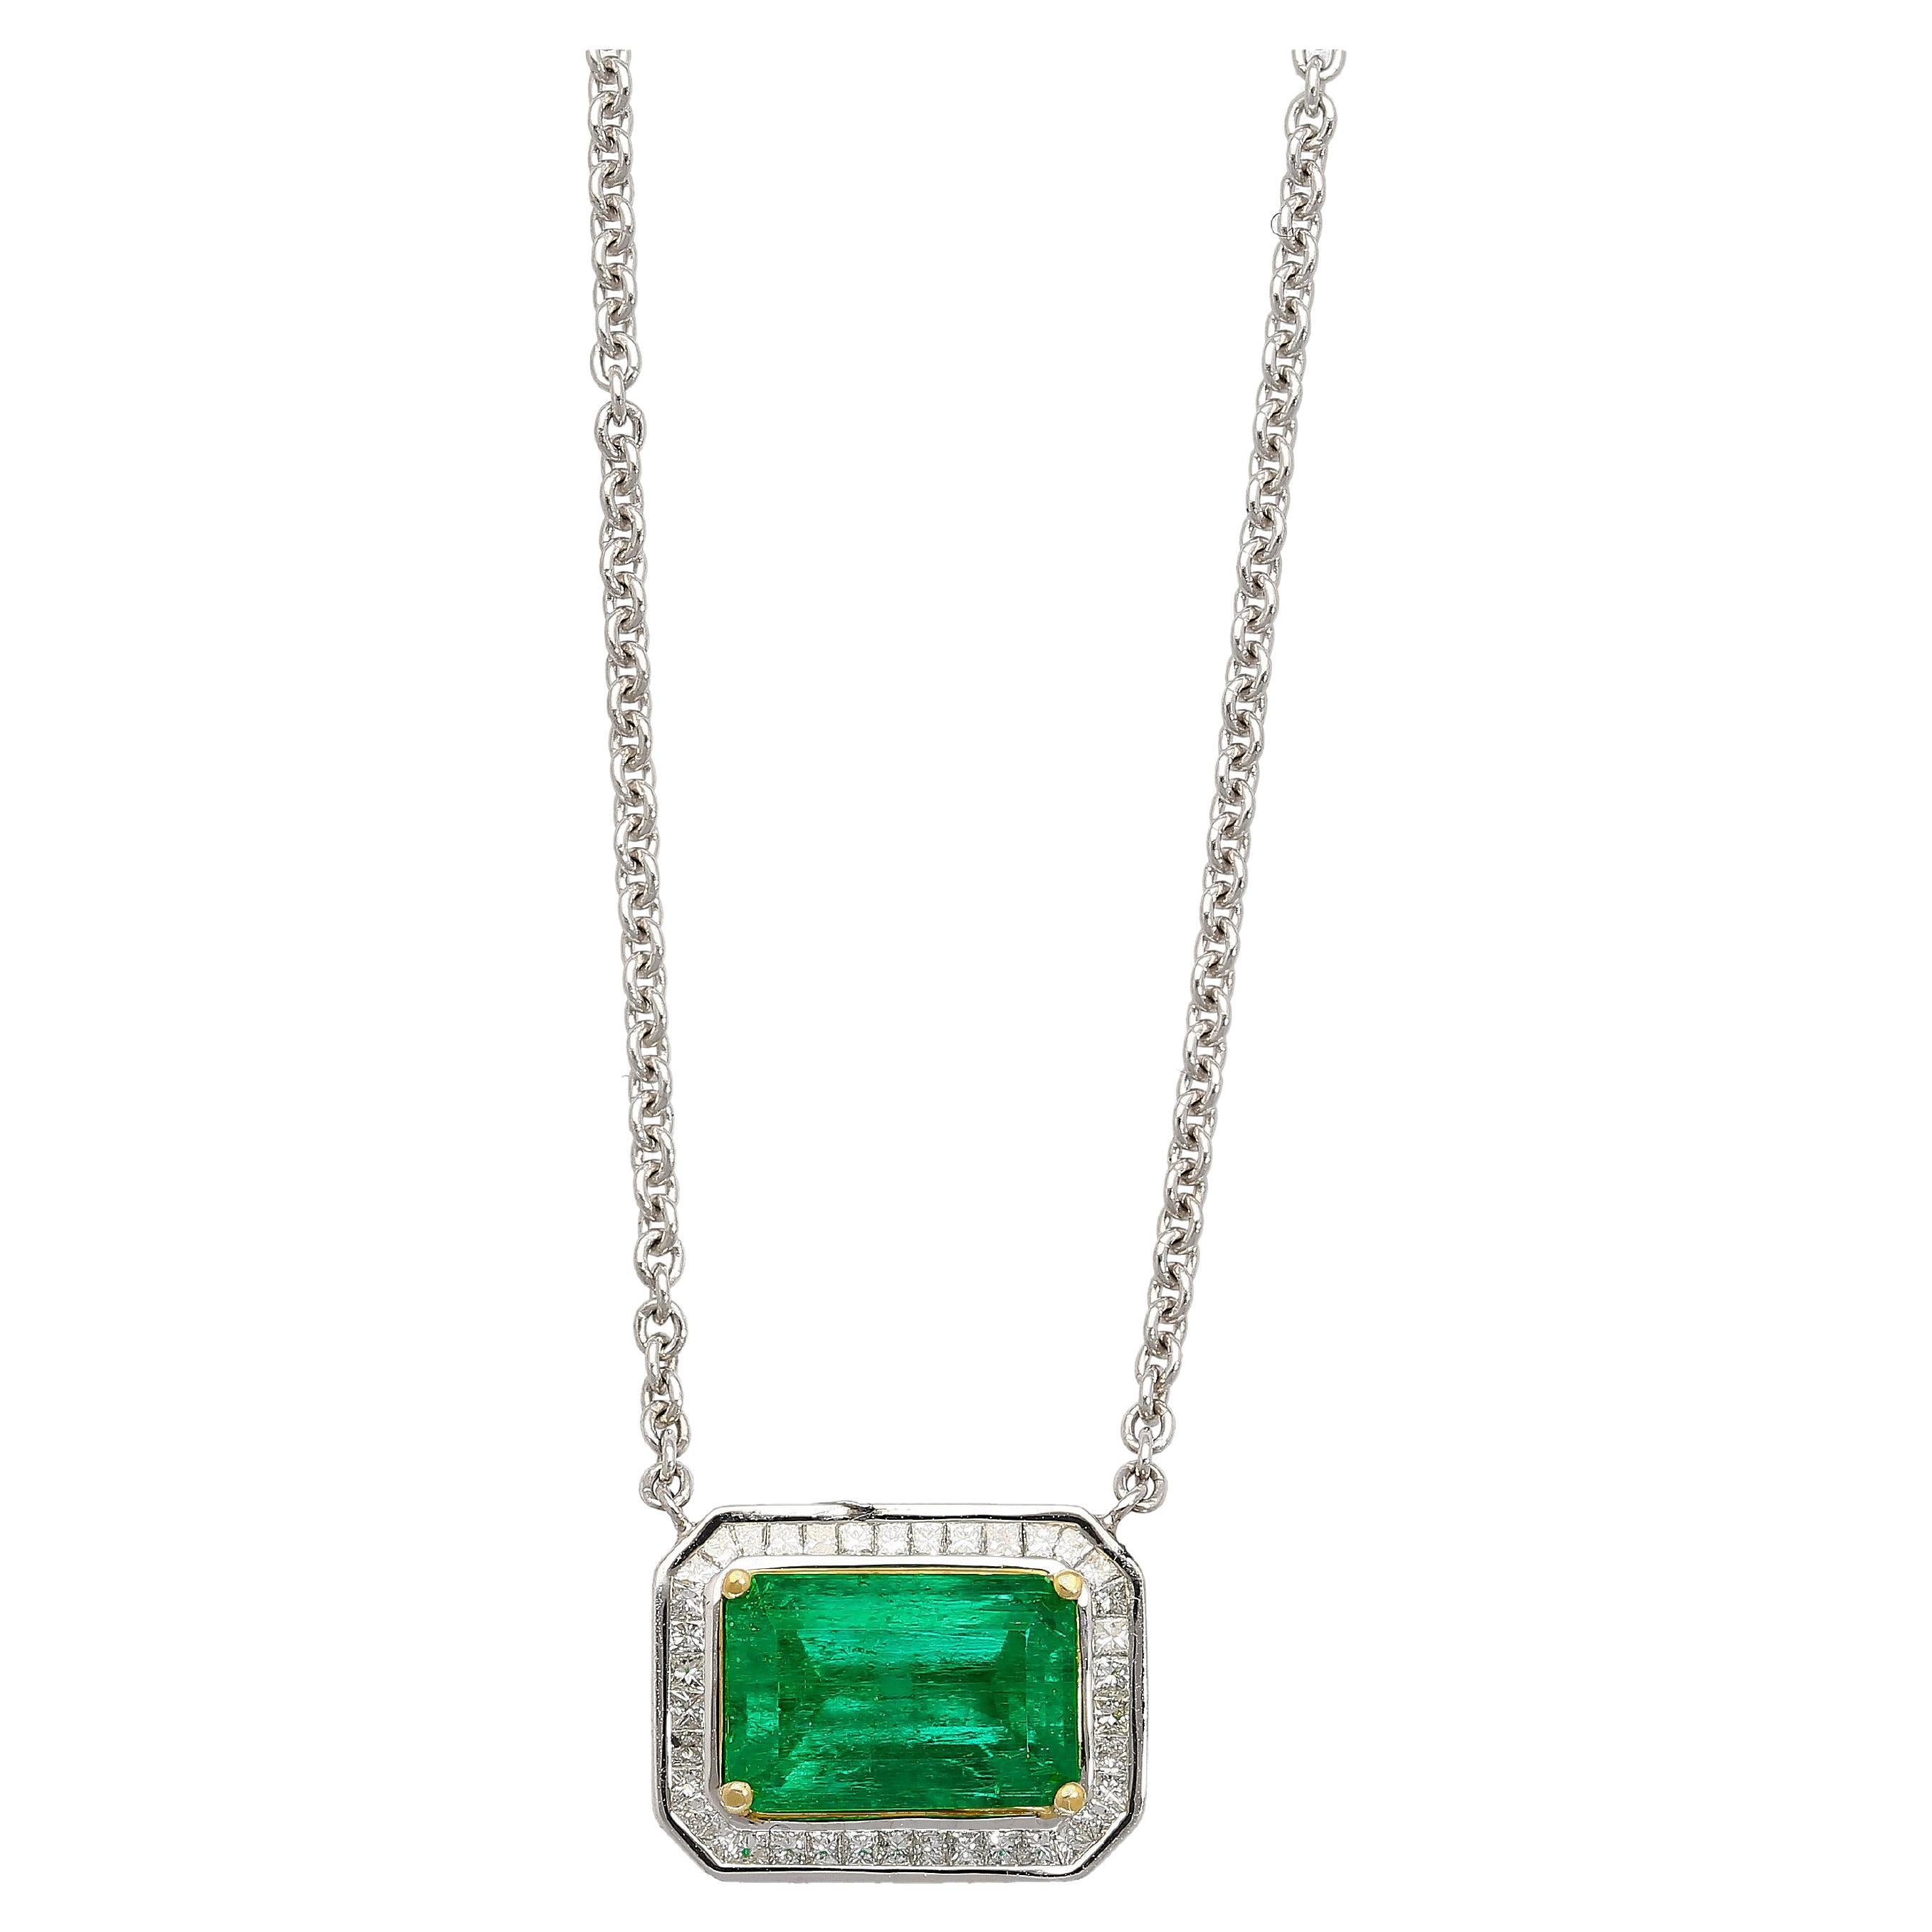 2.66 Carat Vivid Green Minor Oil Muzo Mine Colombian Emerald Floating Necklace For Sale